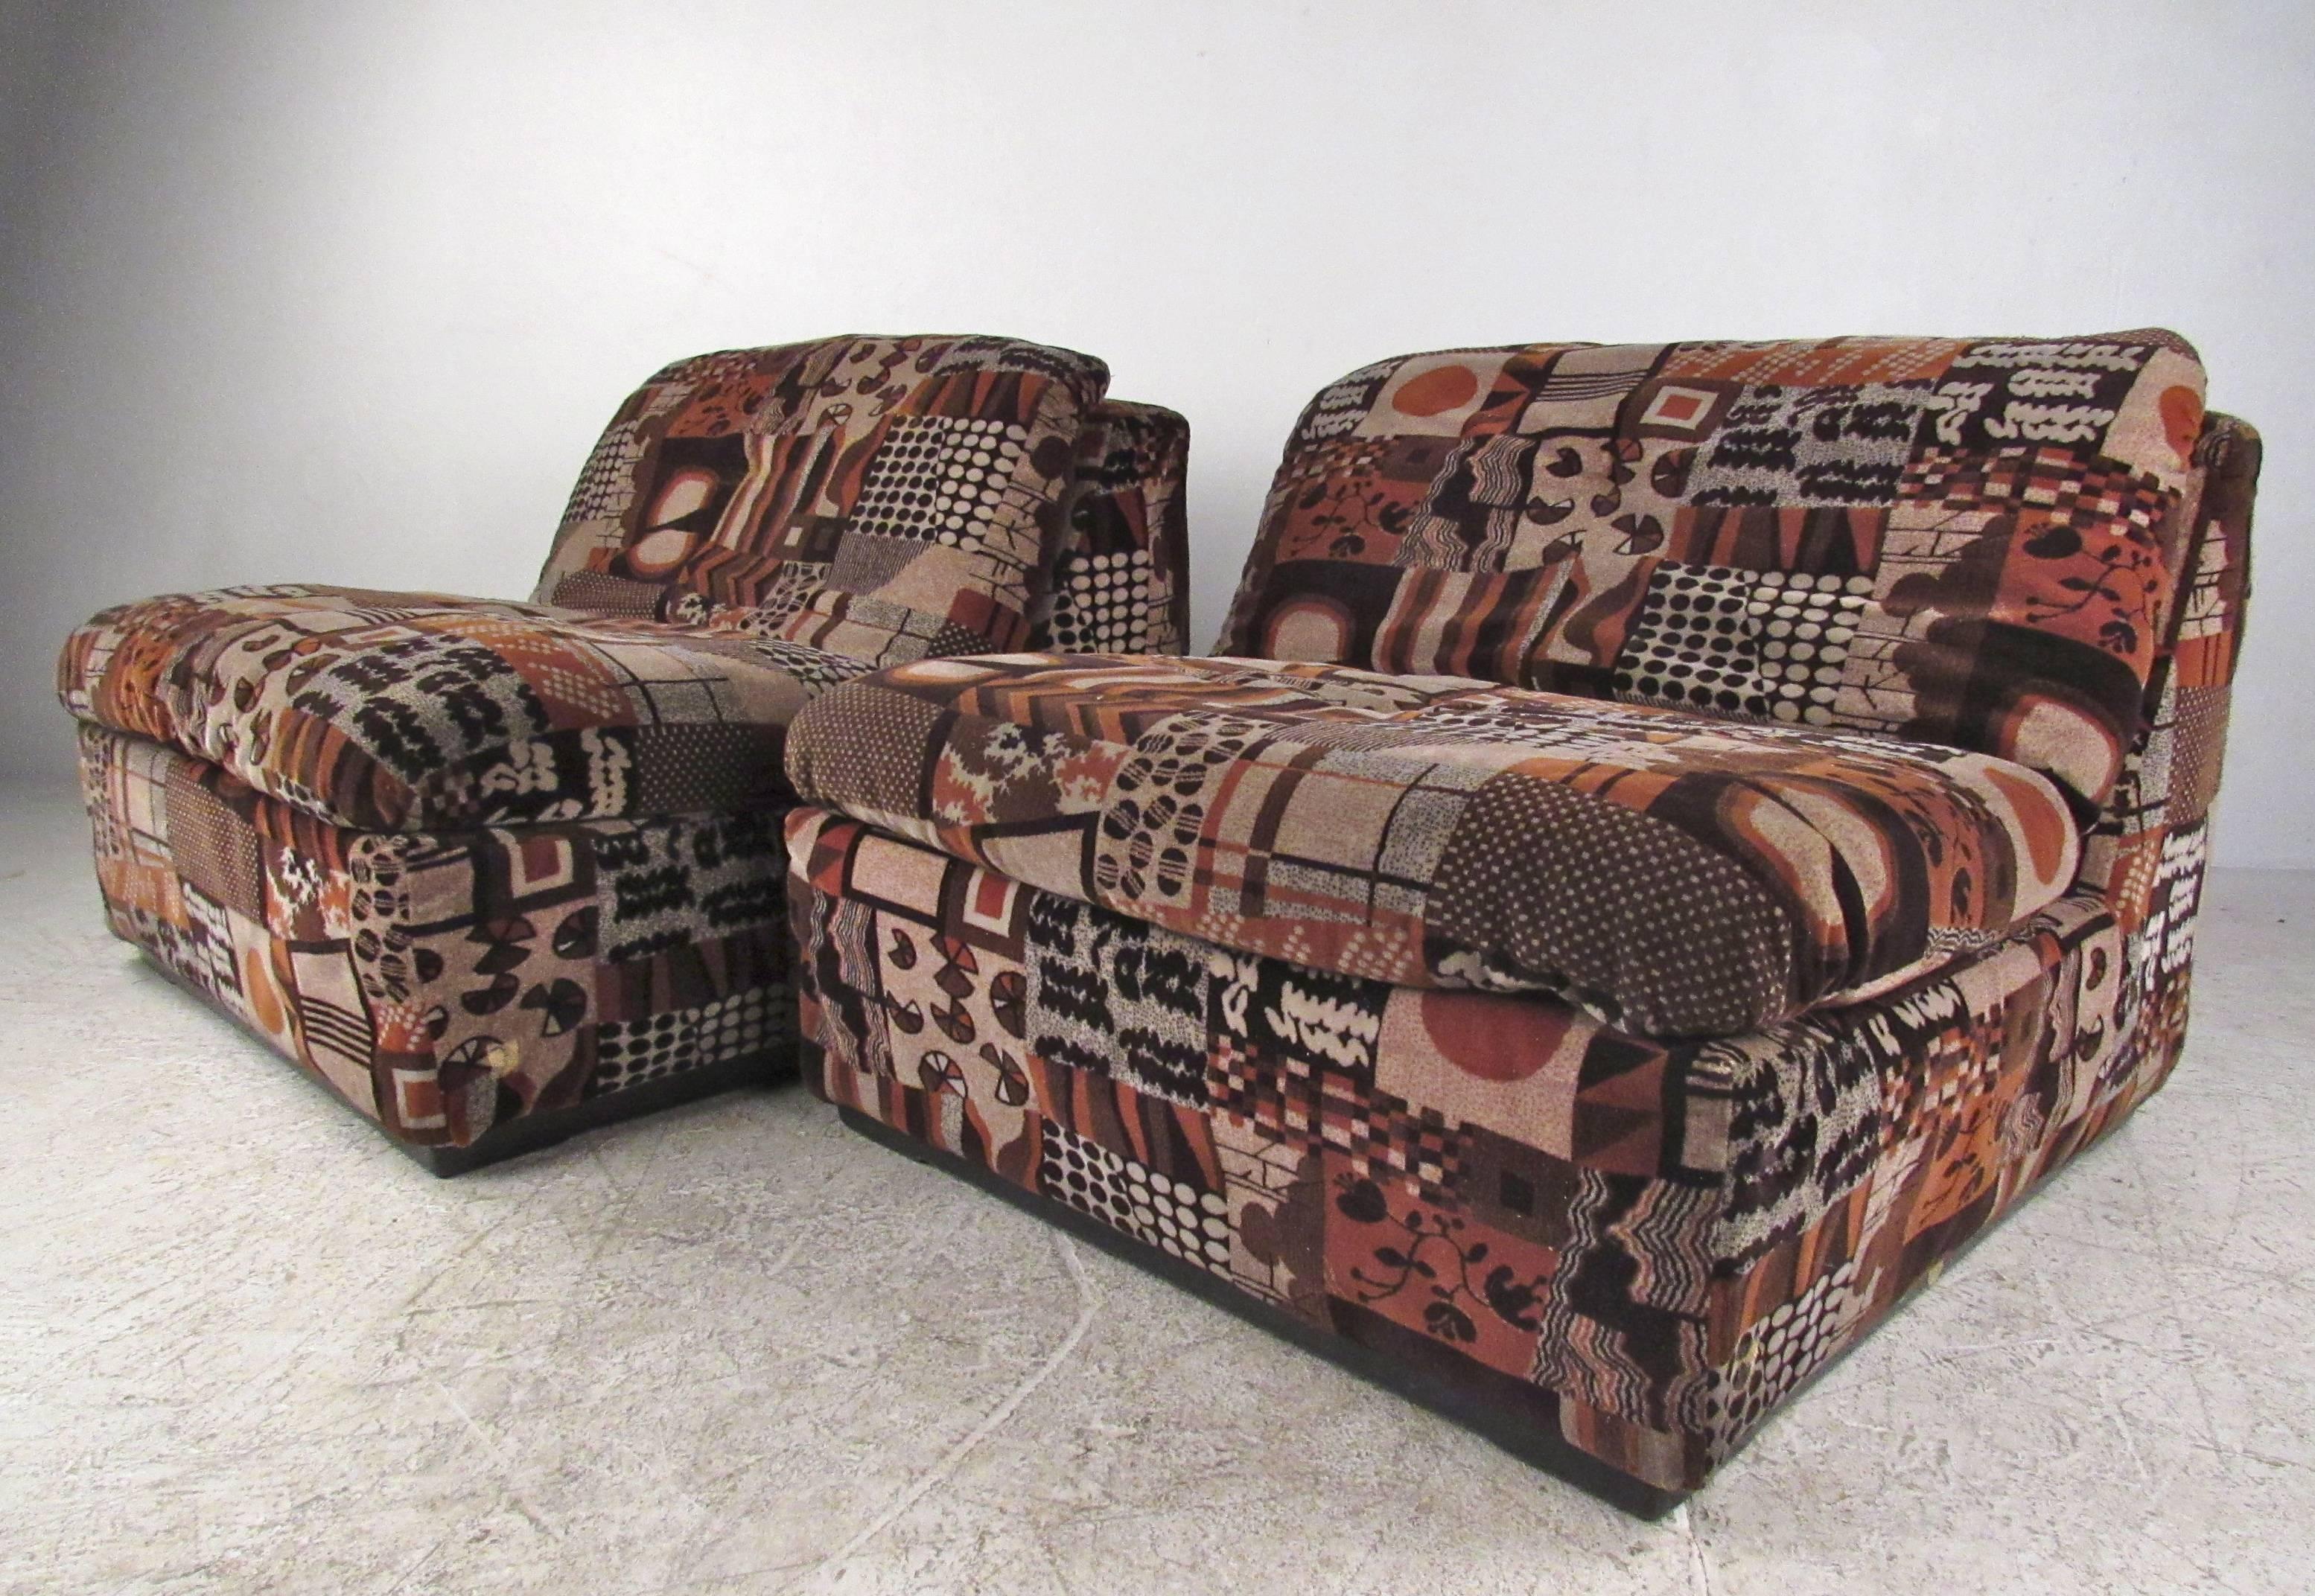 This unique vintage pair of low slung lounge chairs features wild vintage fabric on a comfortable upholstered frame. Uniquely angled with plenty of padding these impressive Mid-Century chairs make an unforgettable addition to any interior. Please